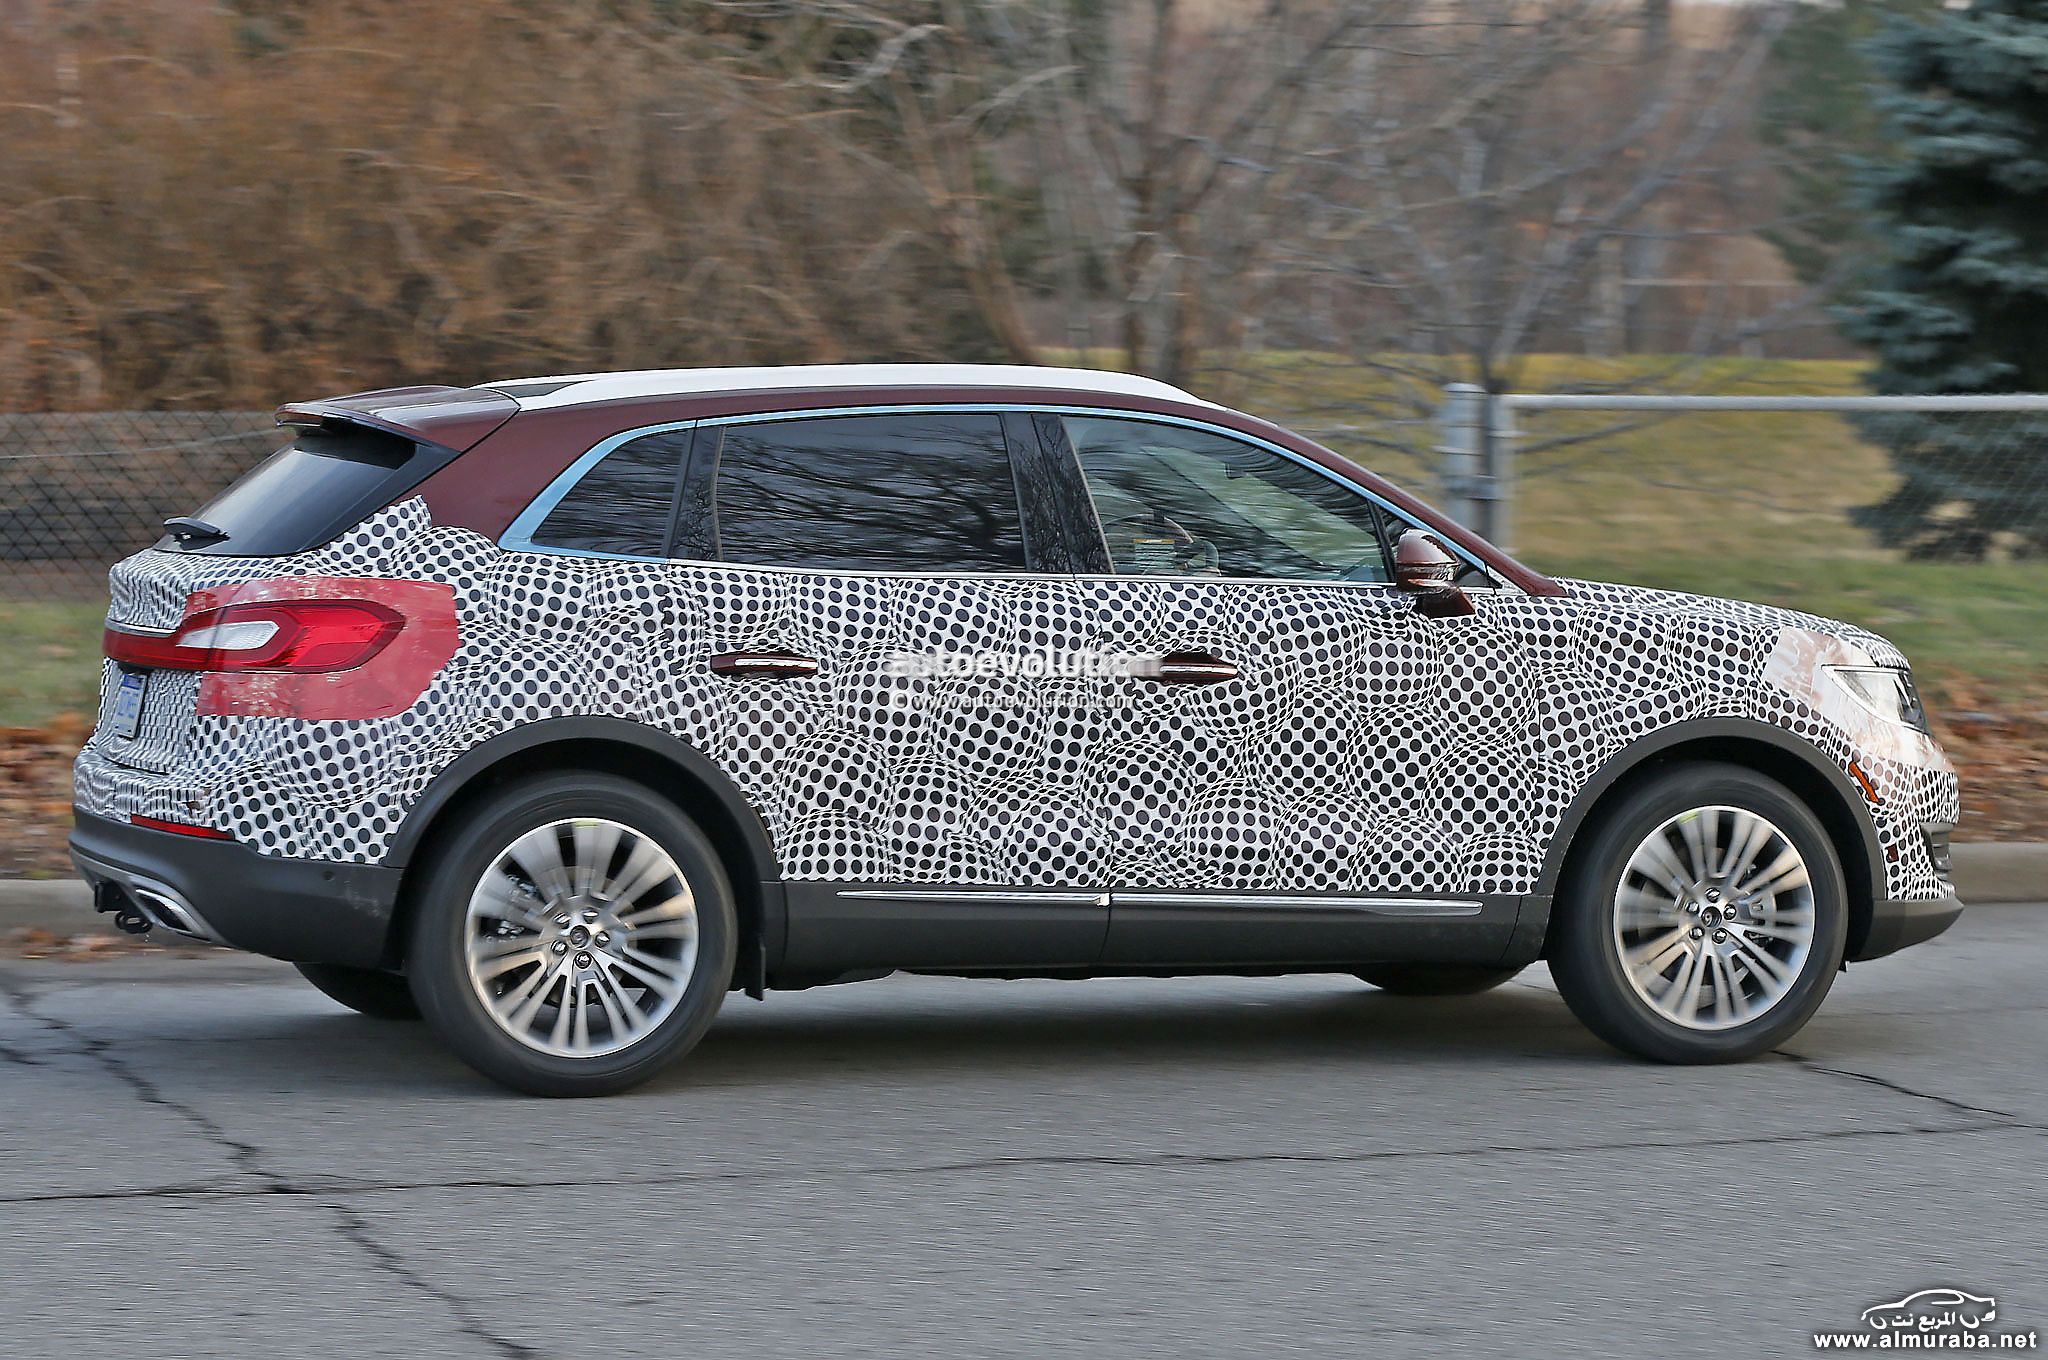 2016-lincoln-mkx-spied-in-production-ready-guise-photo-gallery_8